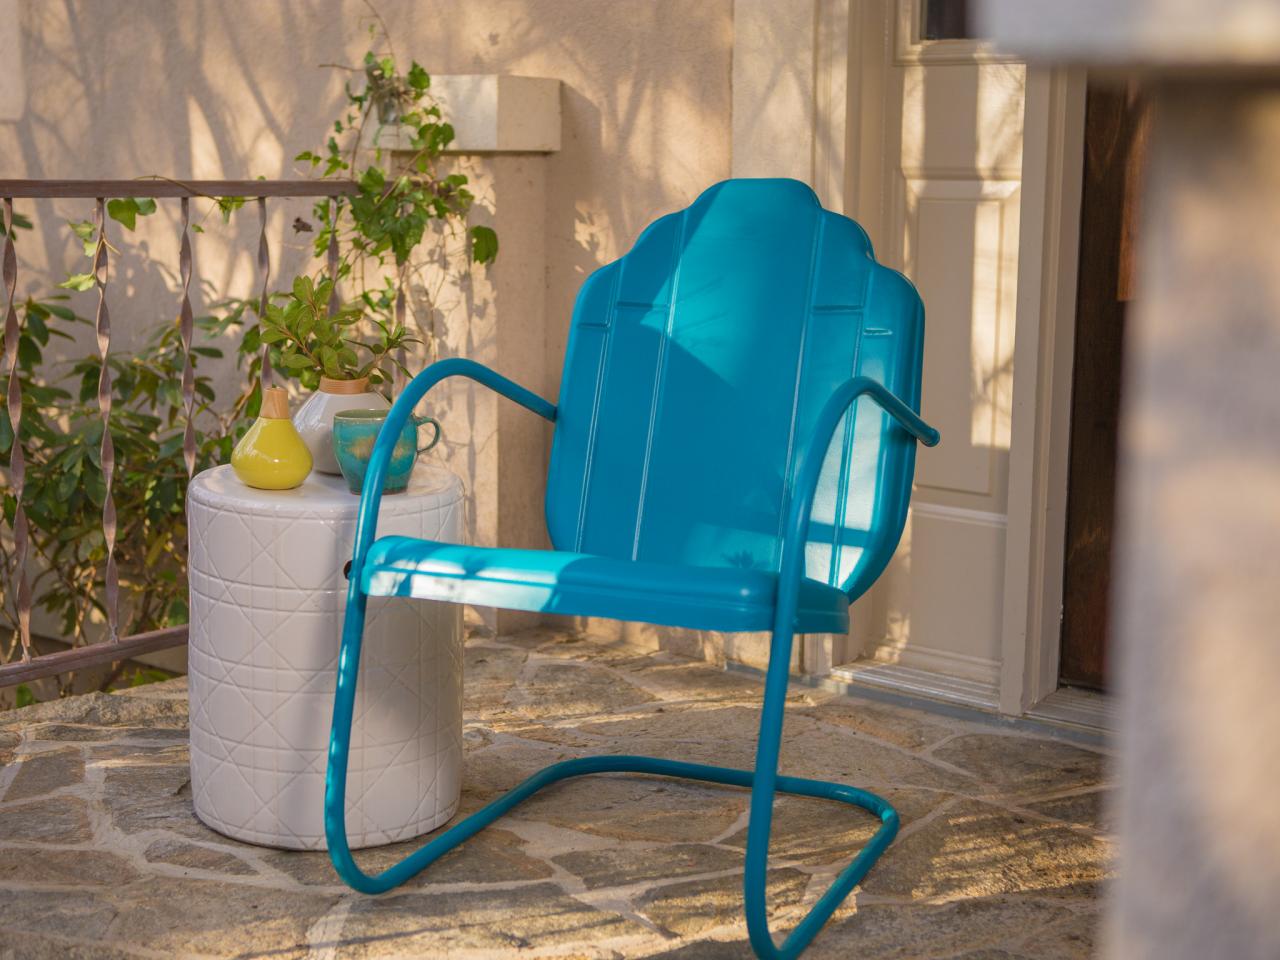 How To Paint An Outdoor Metal Chair, Can I Spray Paint Metal Furniture